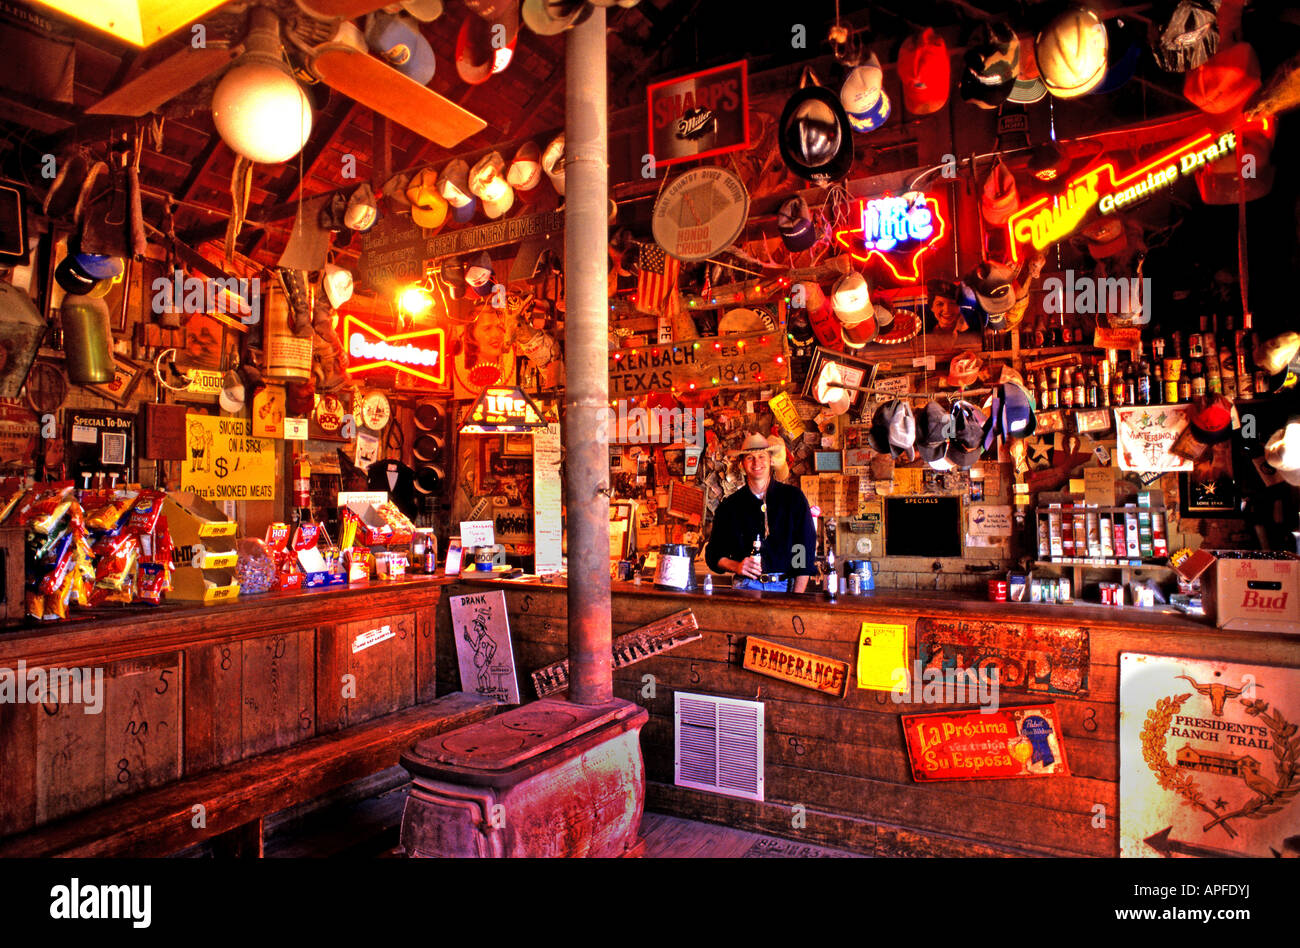 Us Post Office United States Texas USA Texas  Hill Country Restaurant Cafe Luckenbach General Store Saloon Stock Photo